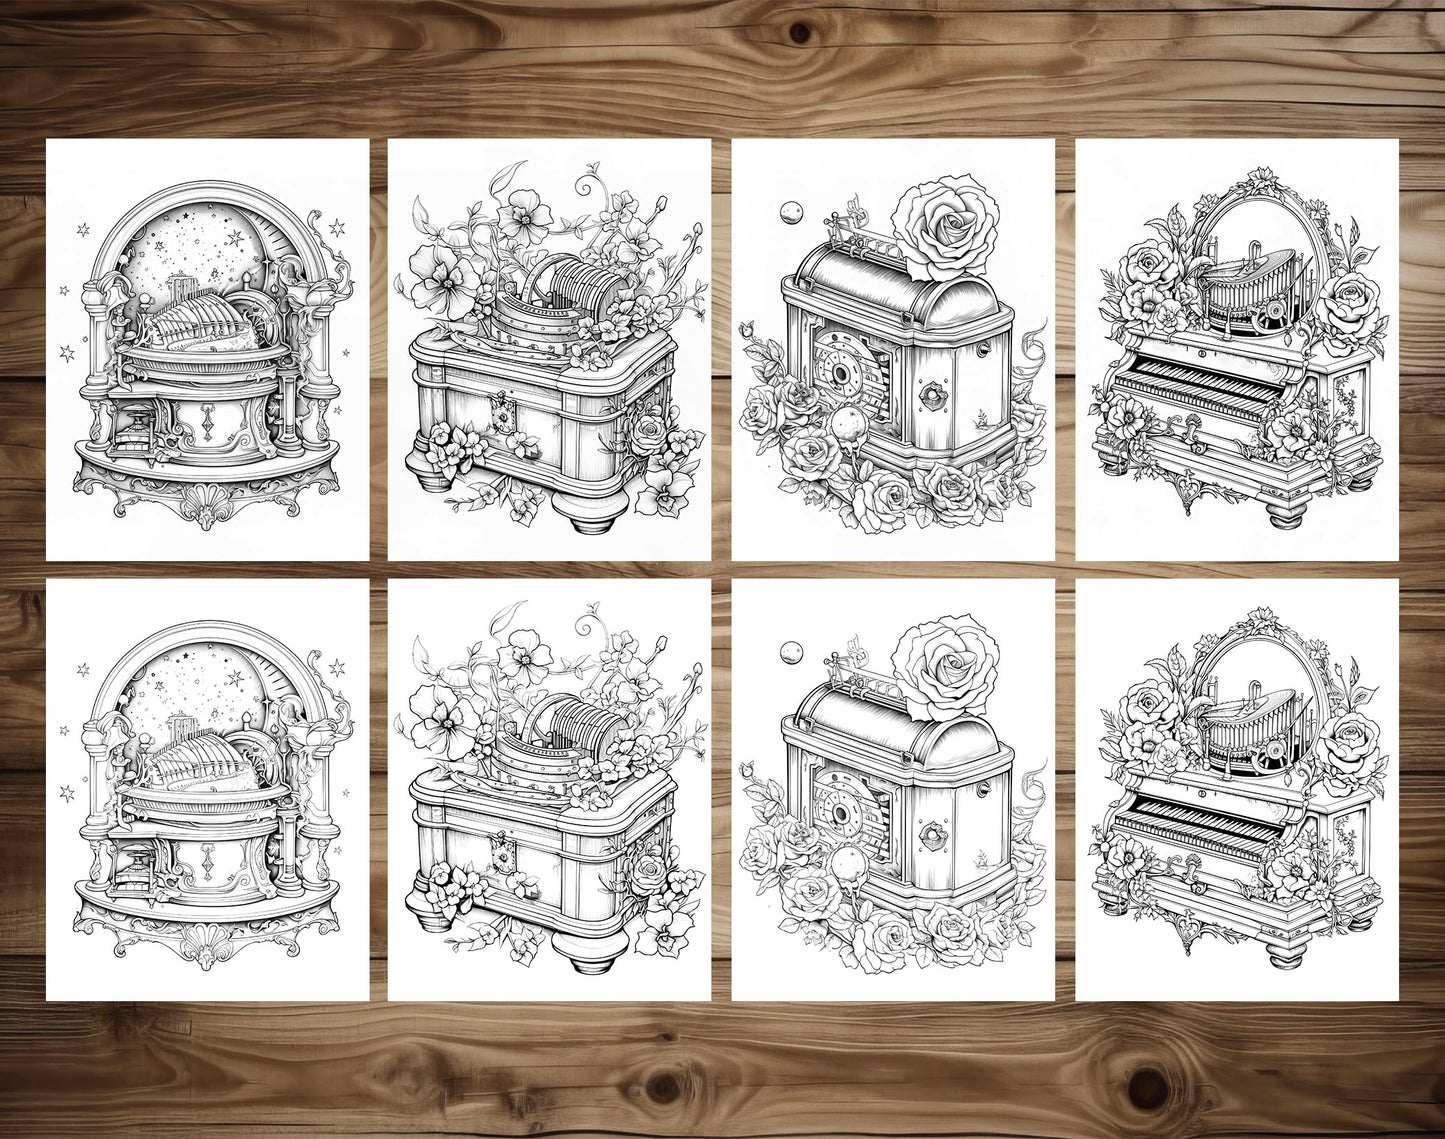 50 Music Box Grayscale Coloring Pages - Instant Download - Printable Dark/Light